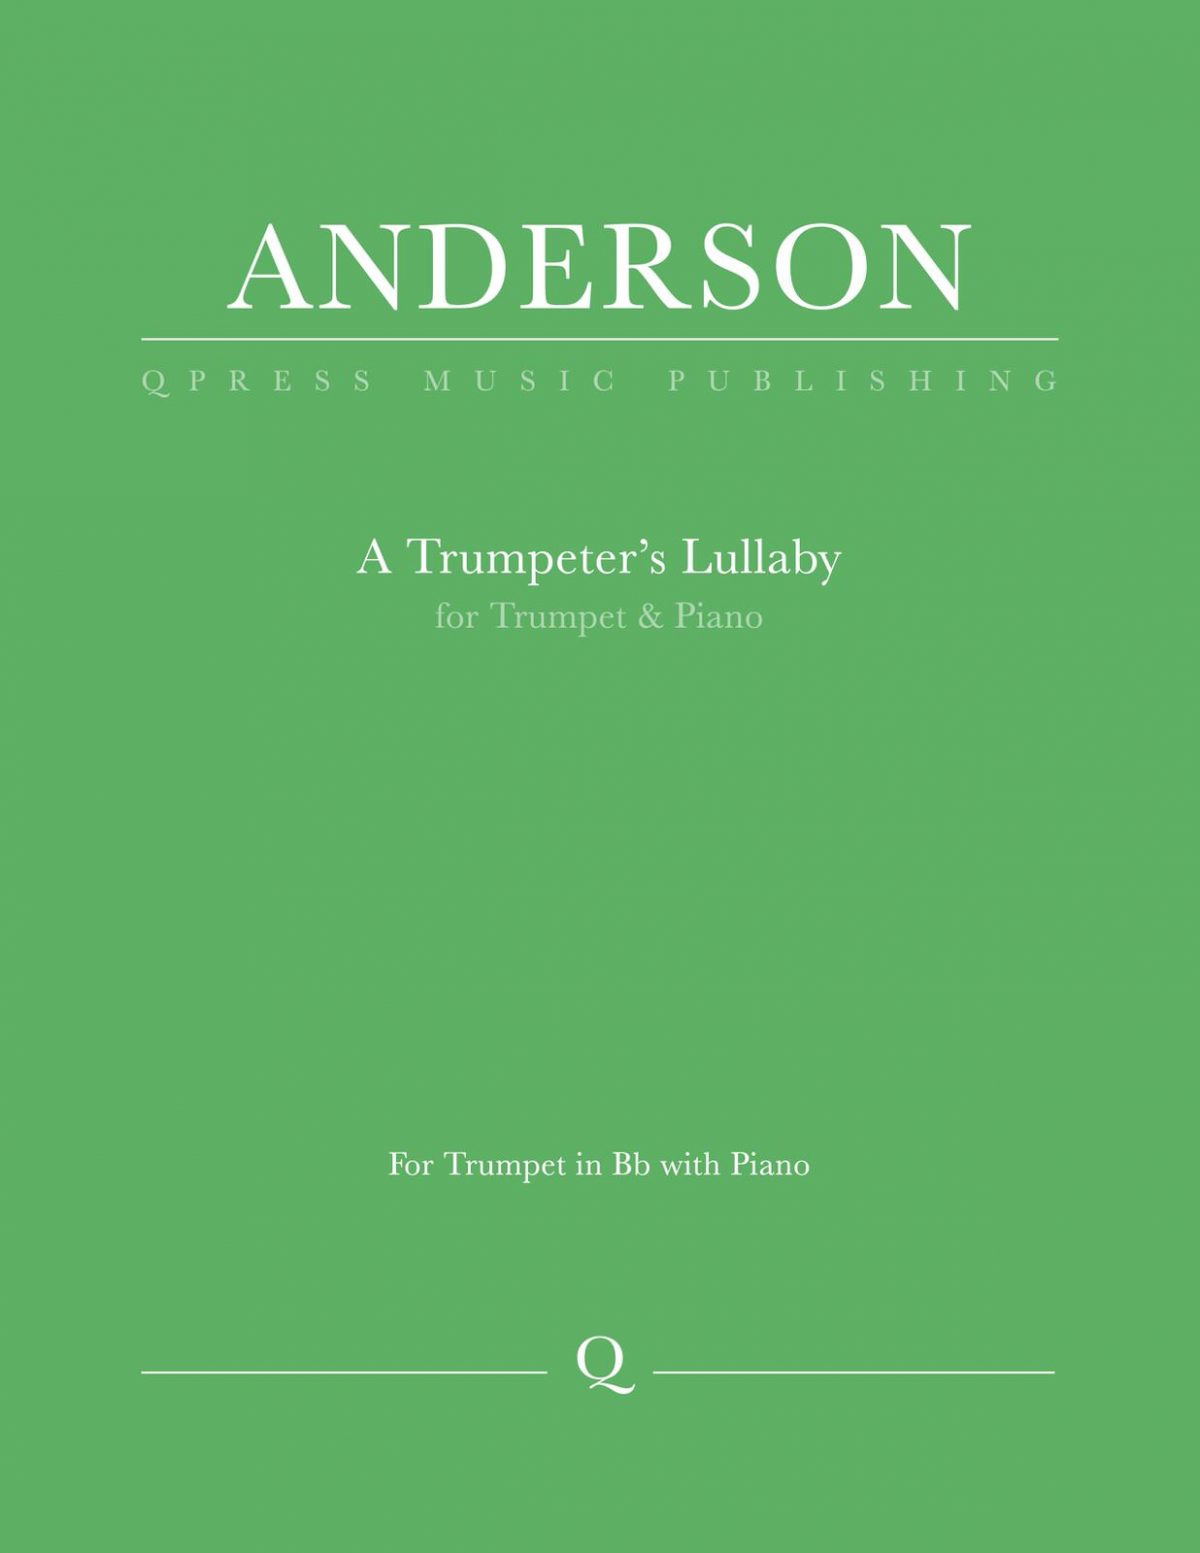 Anderson, A Trumpeter's Lullaby-p1